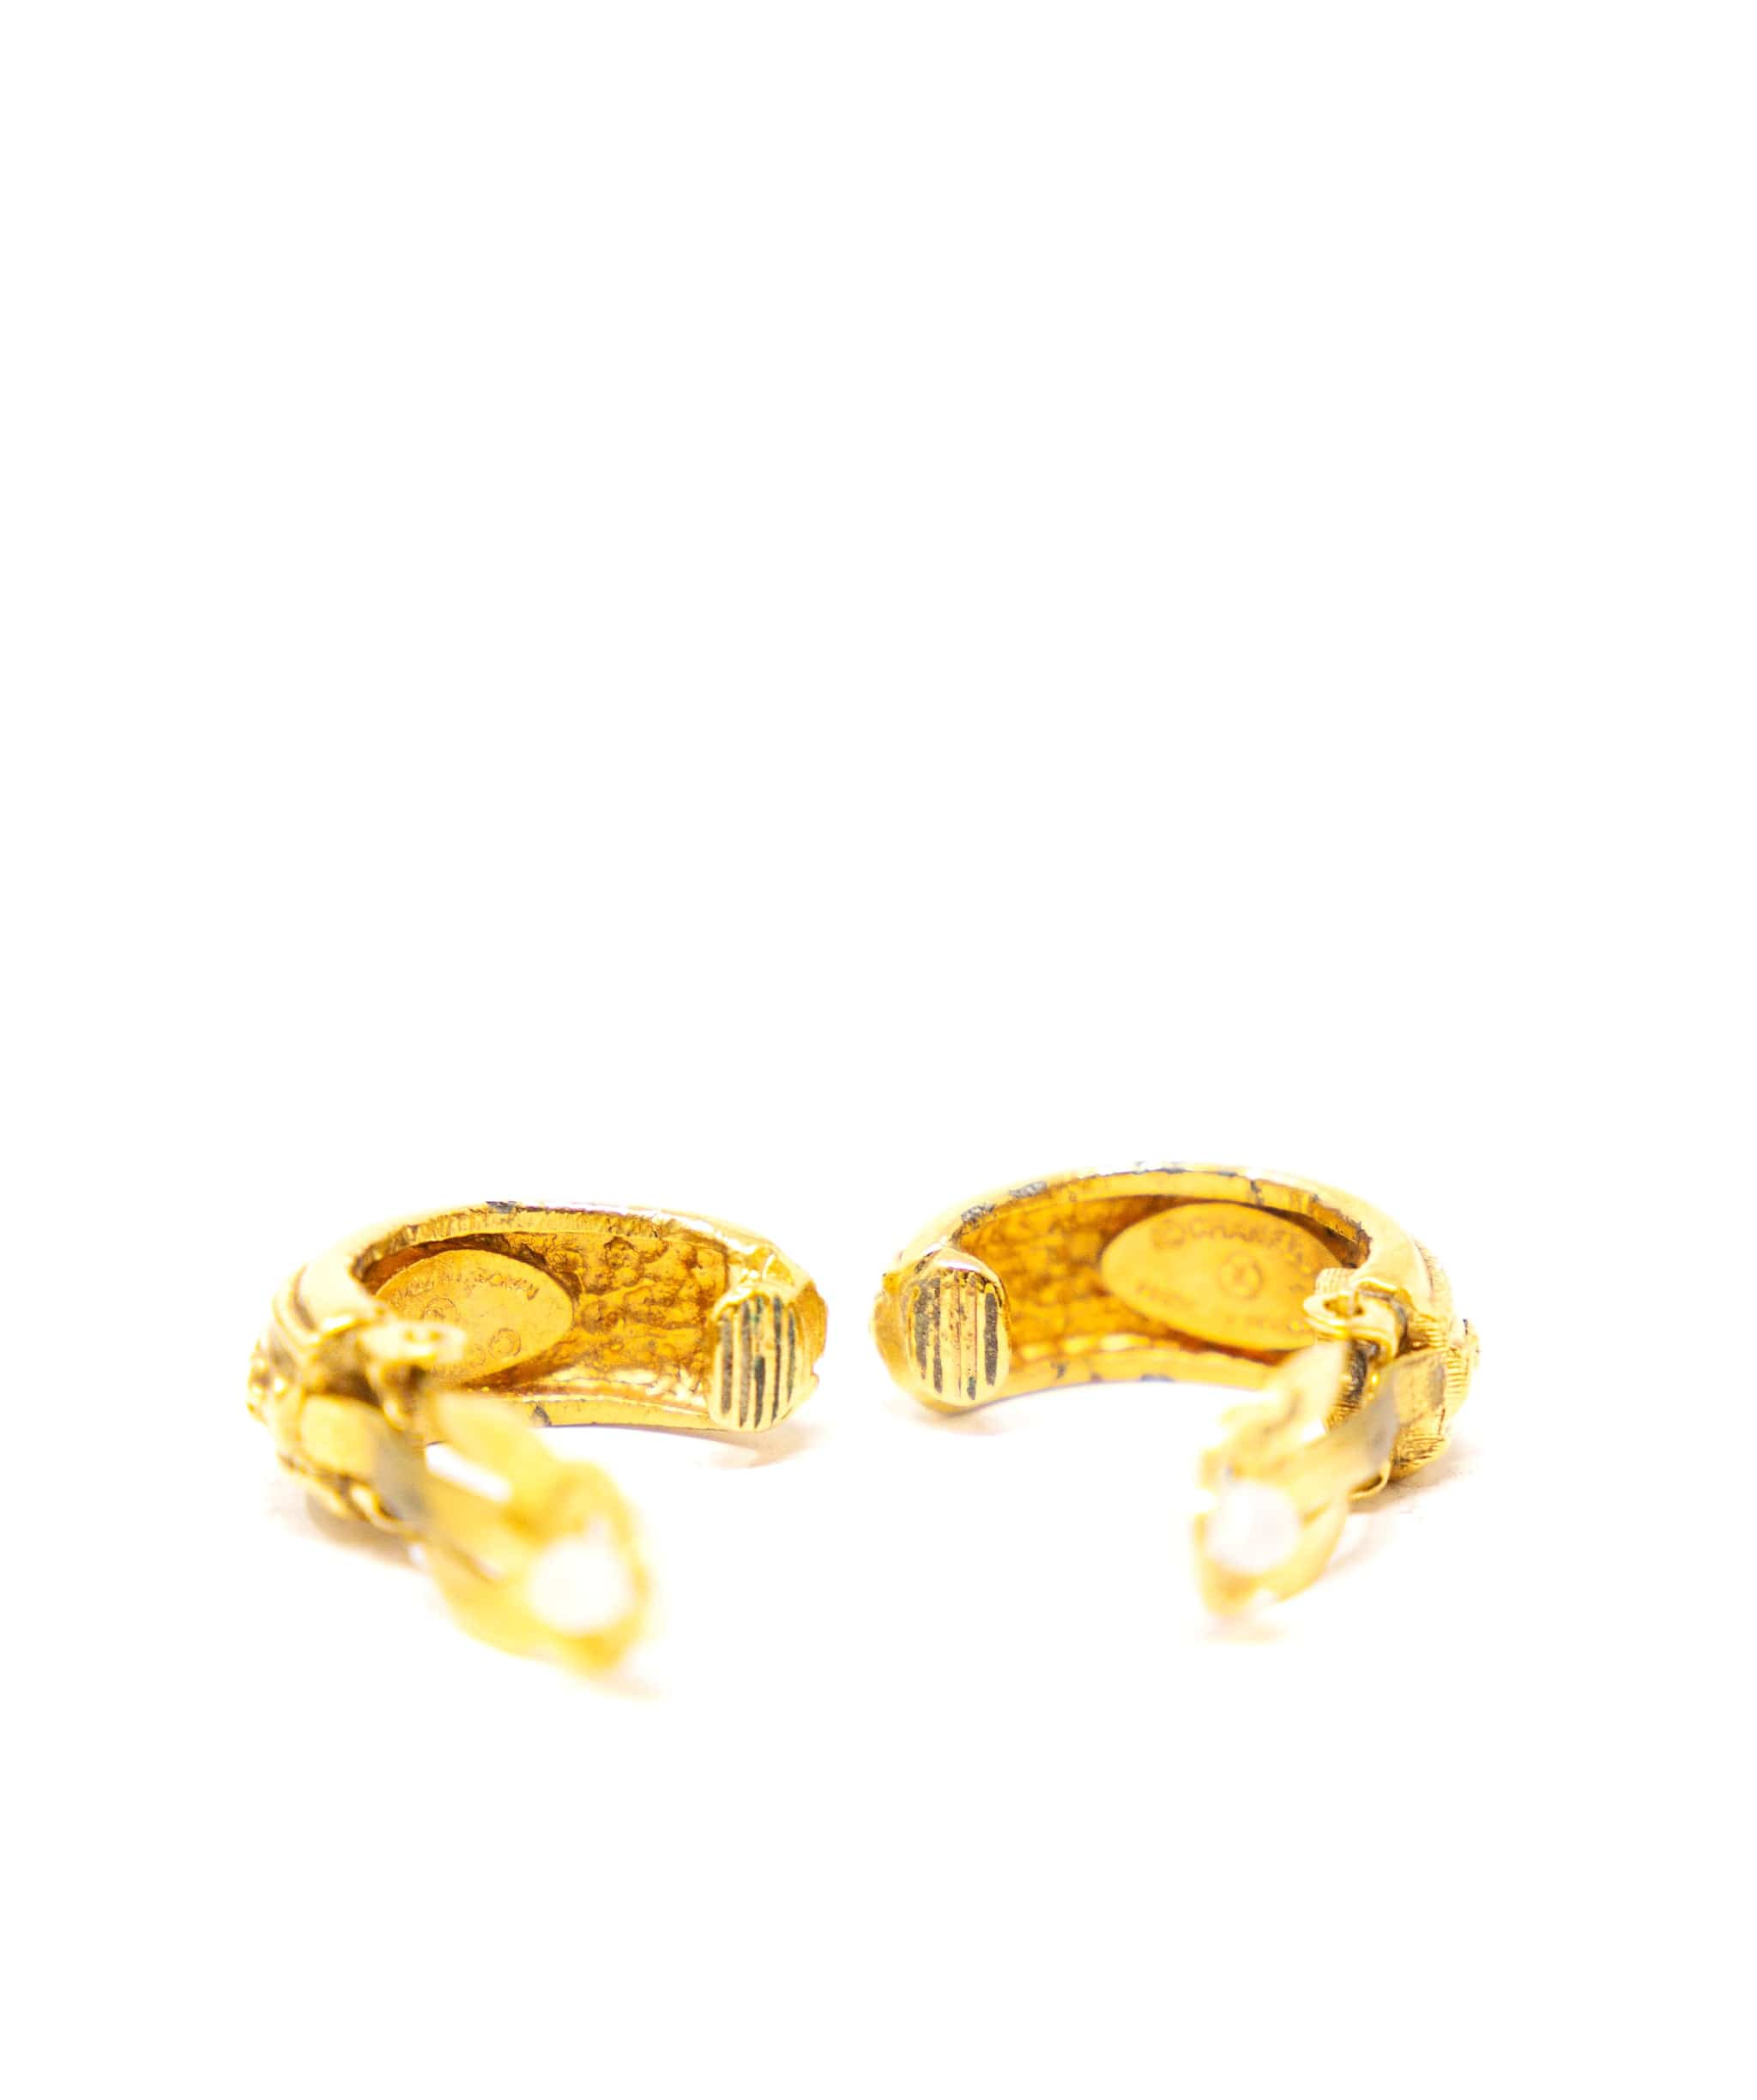 Chanel Chanel Spell out 24kt gold gilded earrings - ADL1838